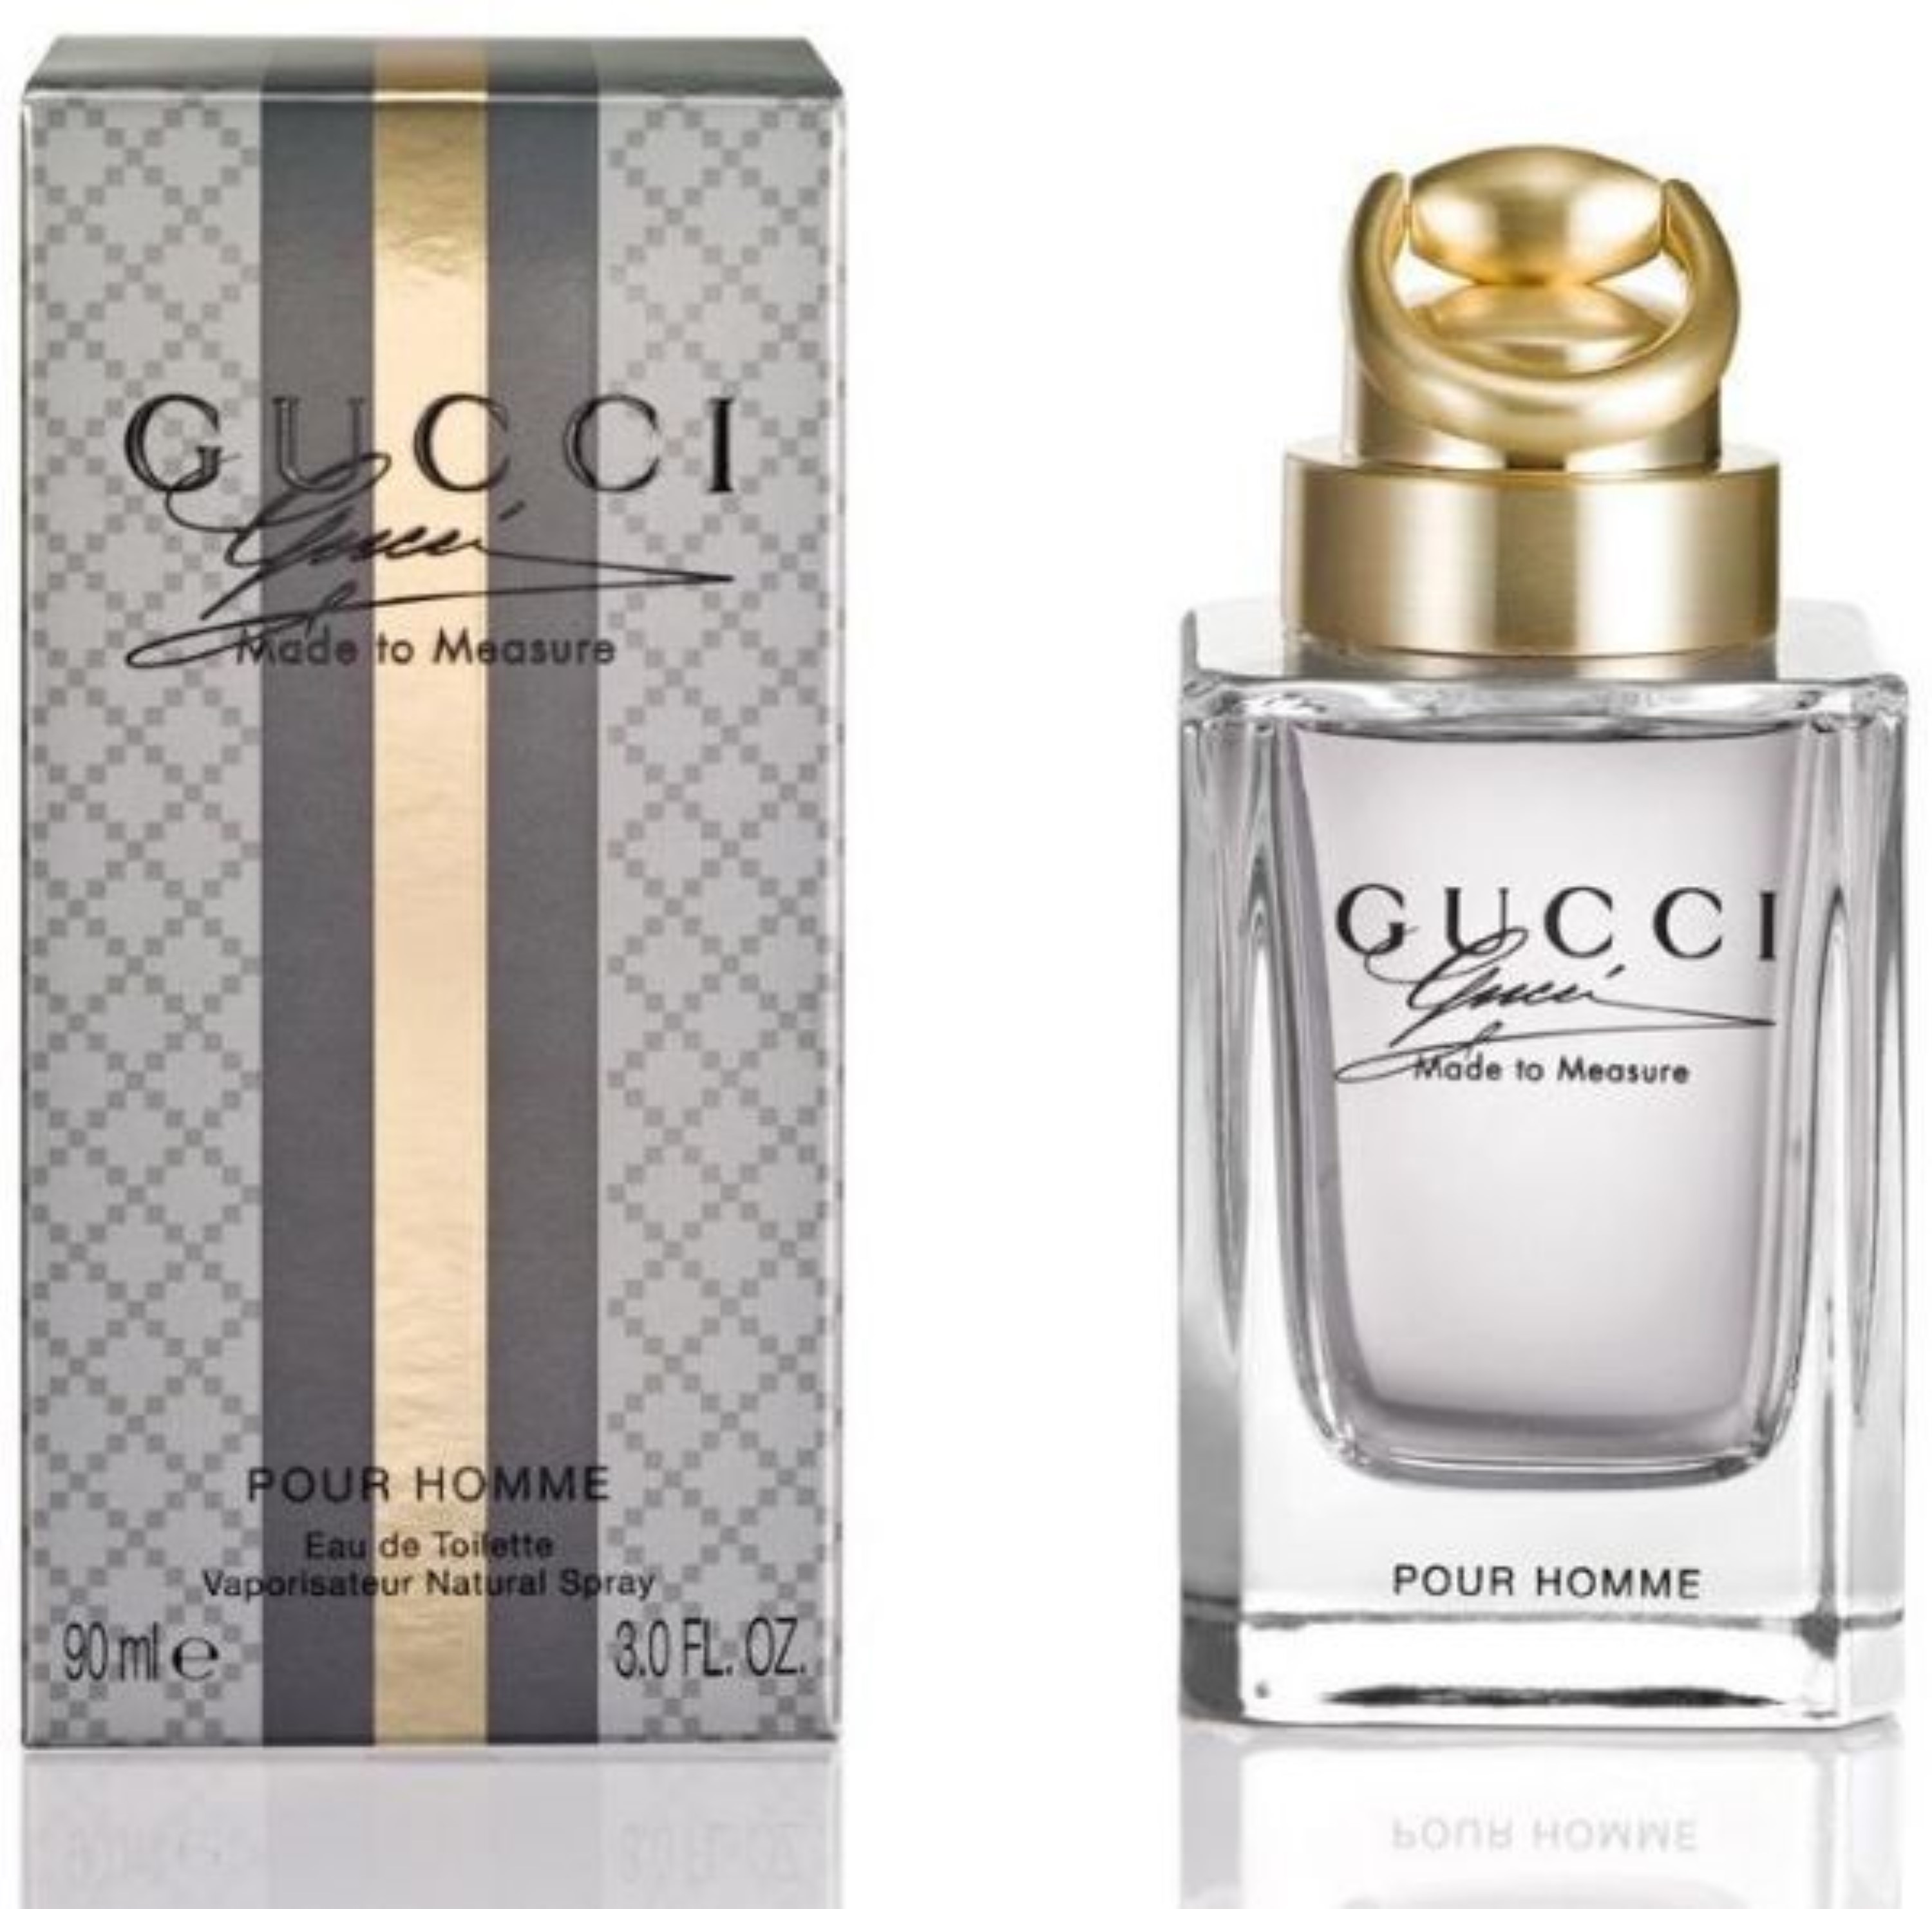 Gucci туалетная вода цены. Gucci by Gucci made to measure pour homme. Gucci made to measure 90 ml. Gucci made to measure pour homme 90ml. Gucci made to measure 50ml.